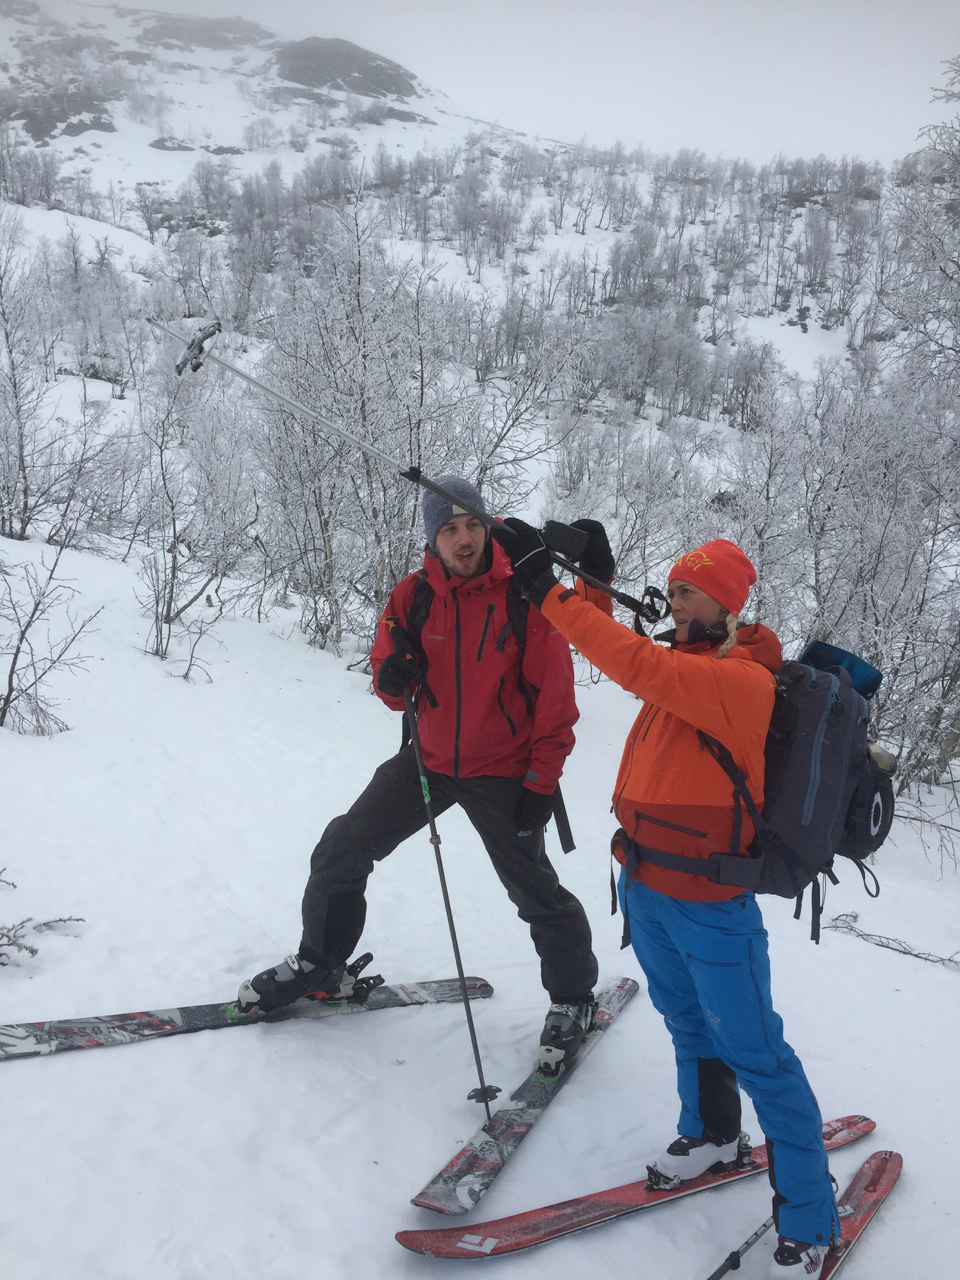 Mindfulness in helping correct heuristic decision making while in avalanche terrain